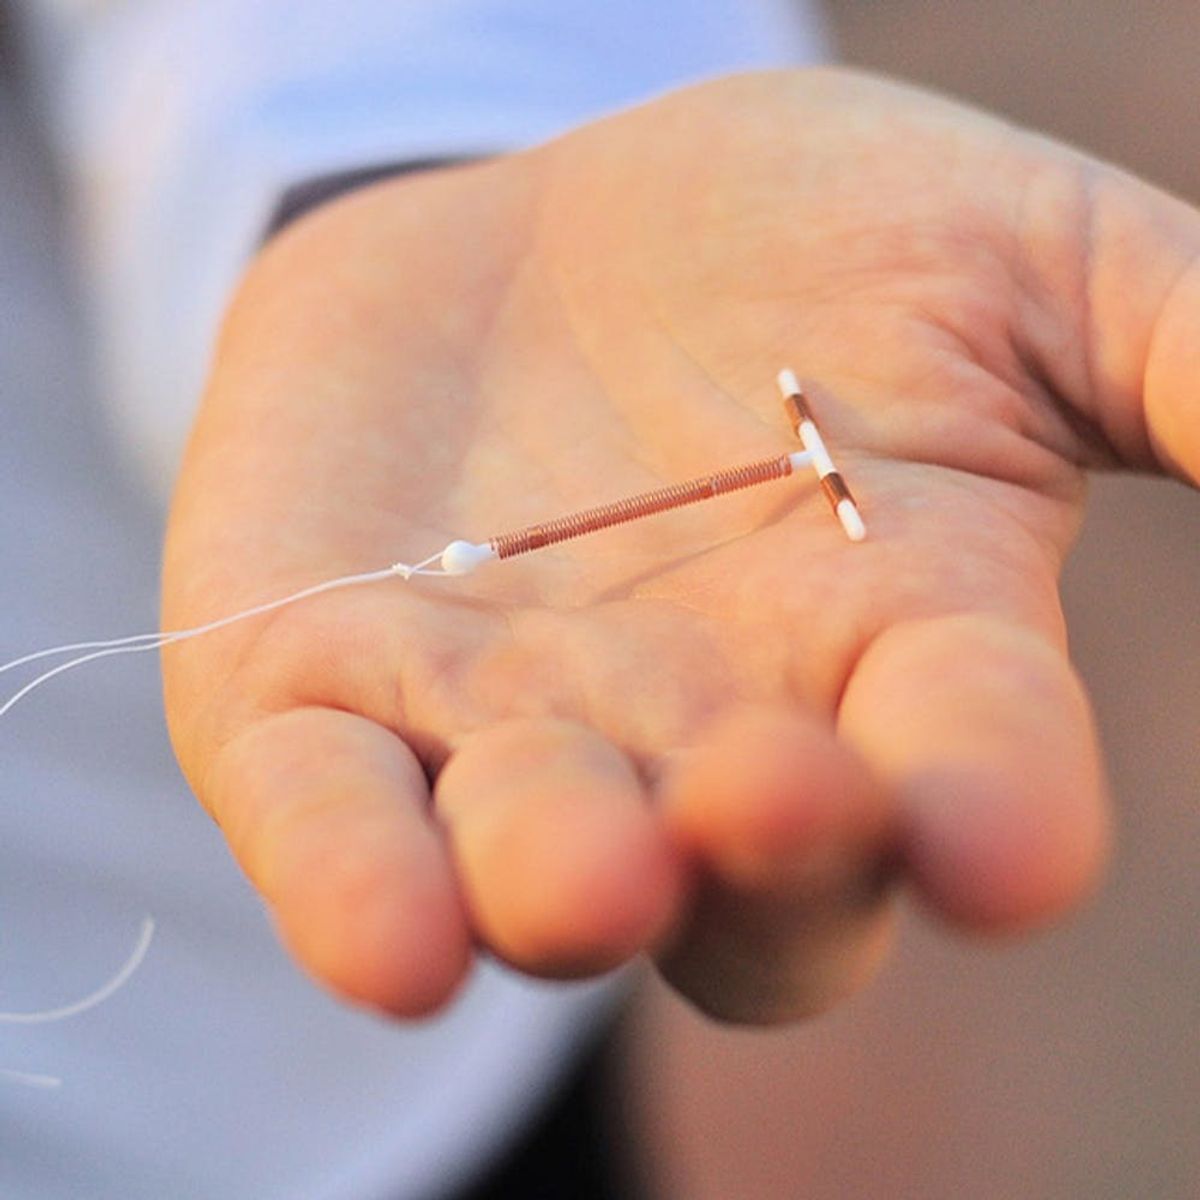  A Self-Insertable IUD Could Be Happening in the Near Future